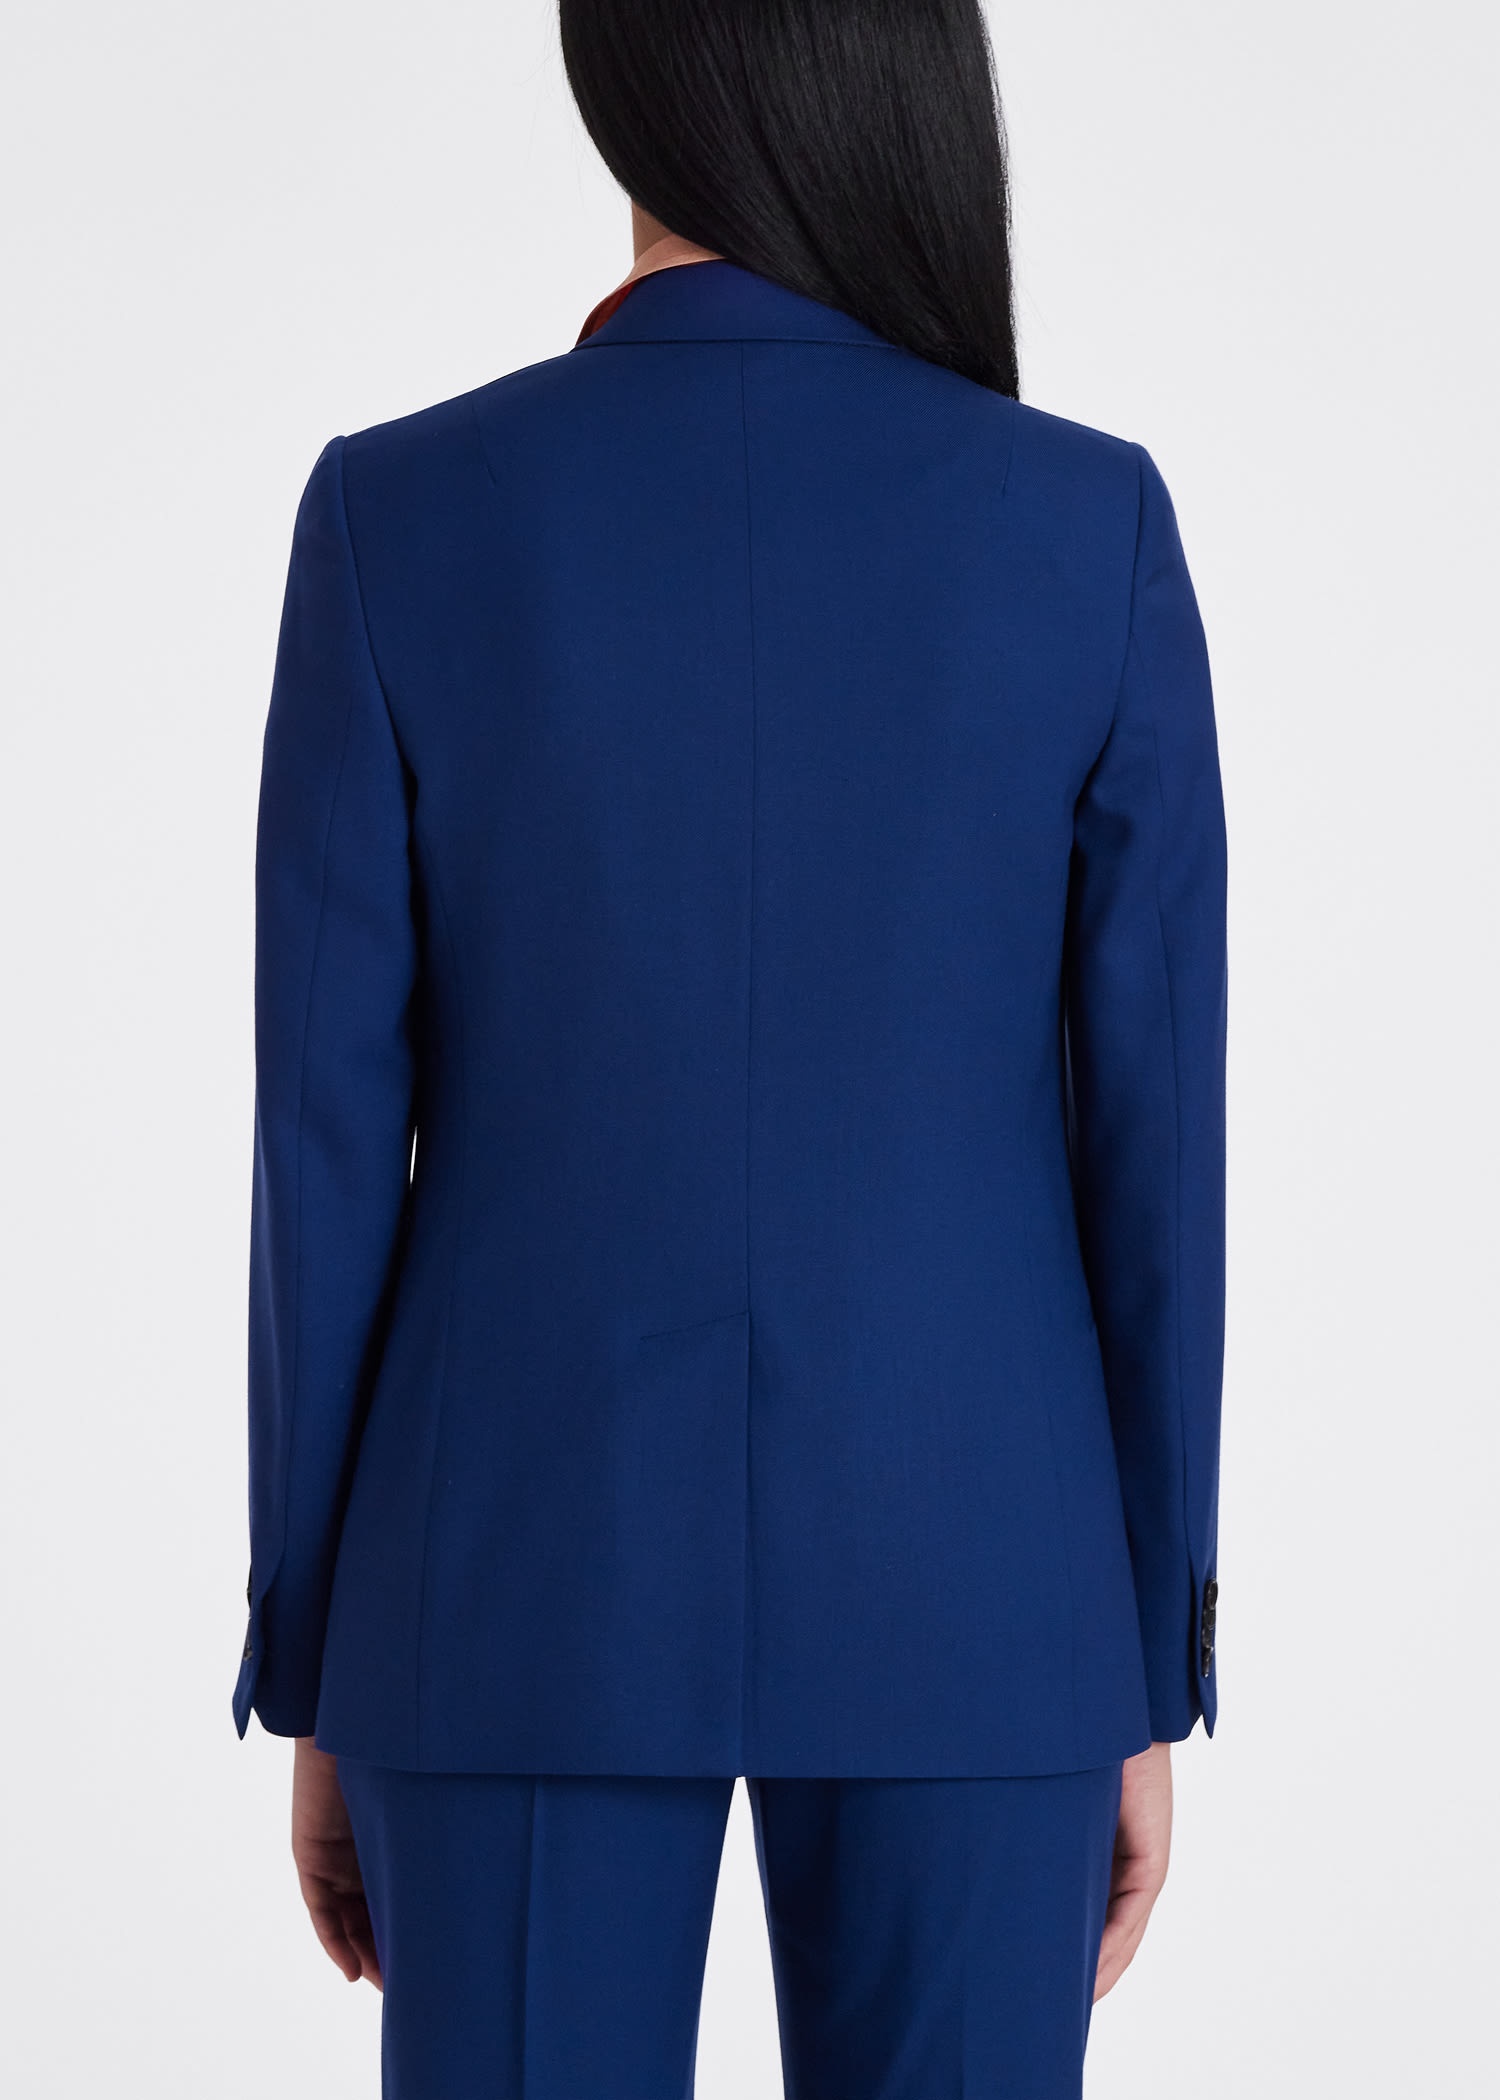 A Suit To Travel In - Women's Wool Suit - 9